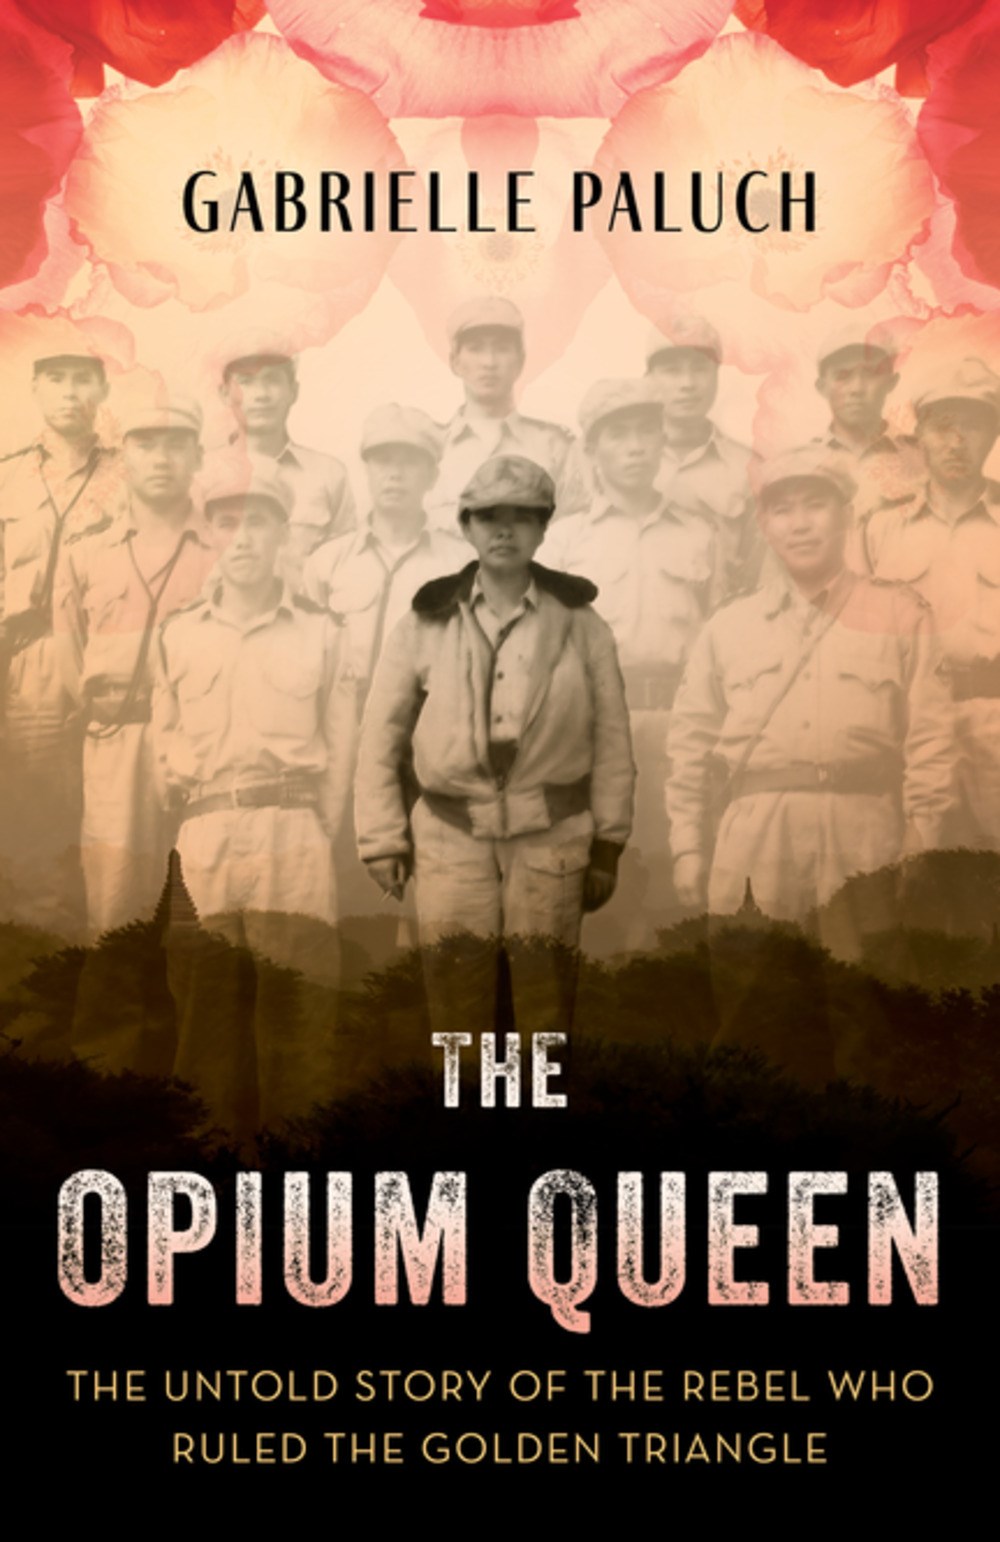 The Opium Queen: The Untold Story of the Rebel Who Ruled the Golden Triangle